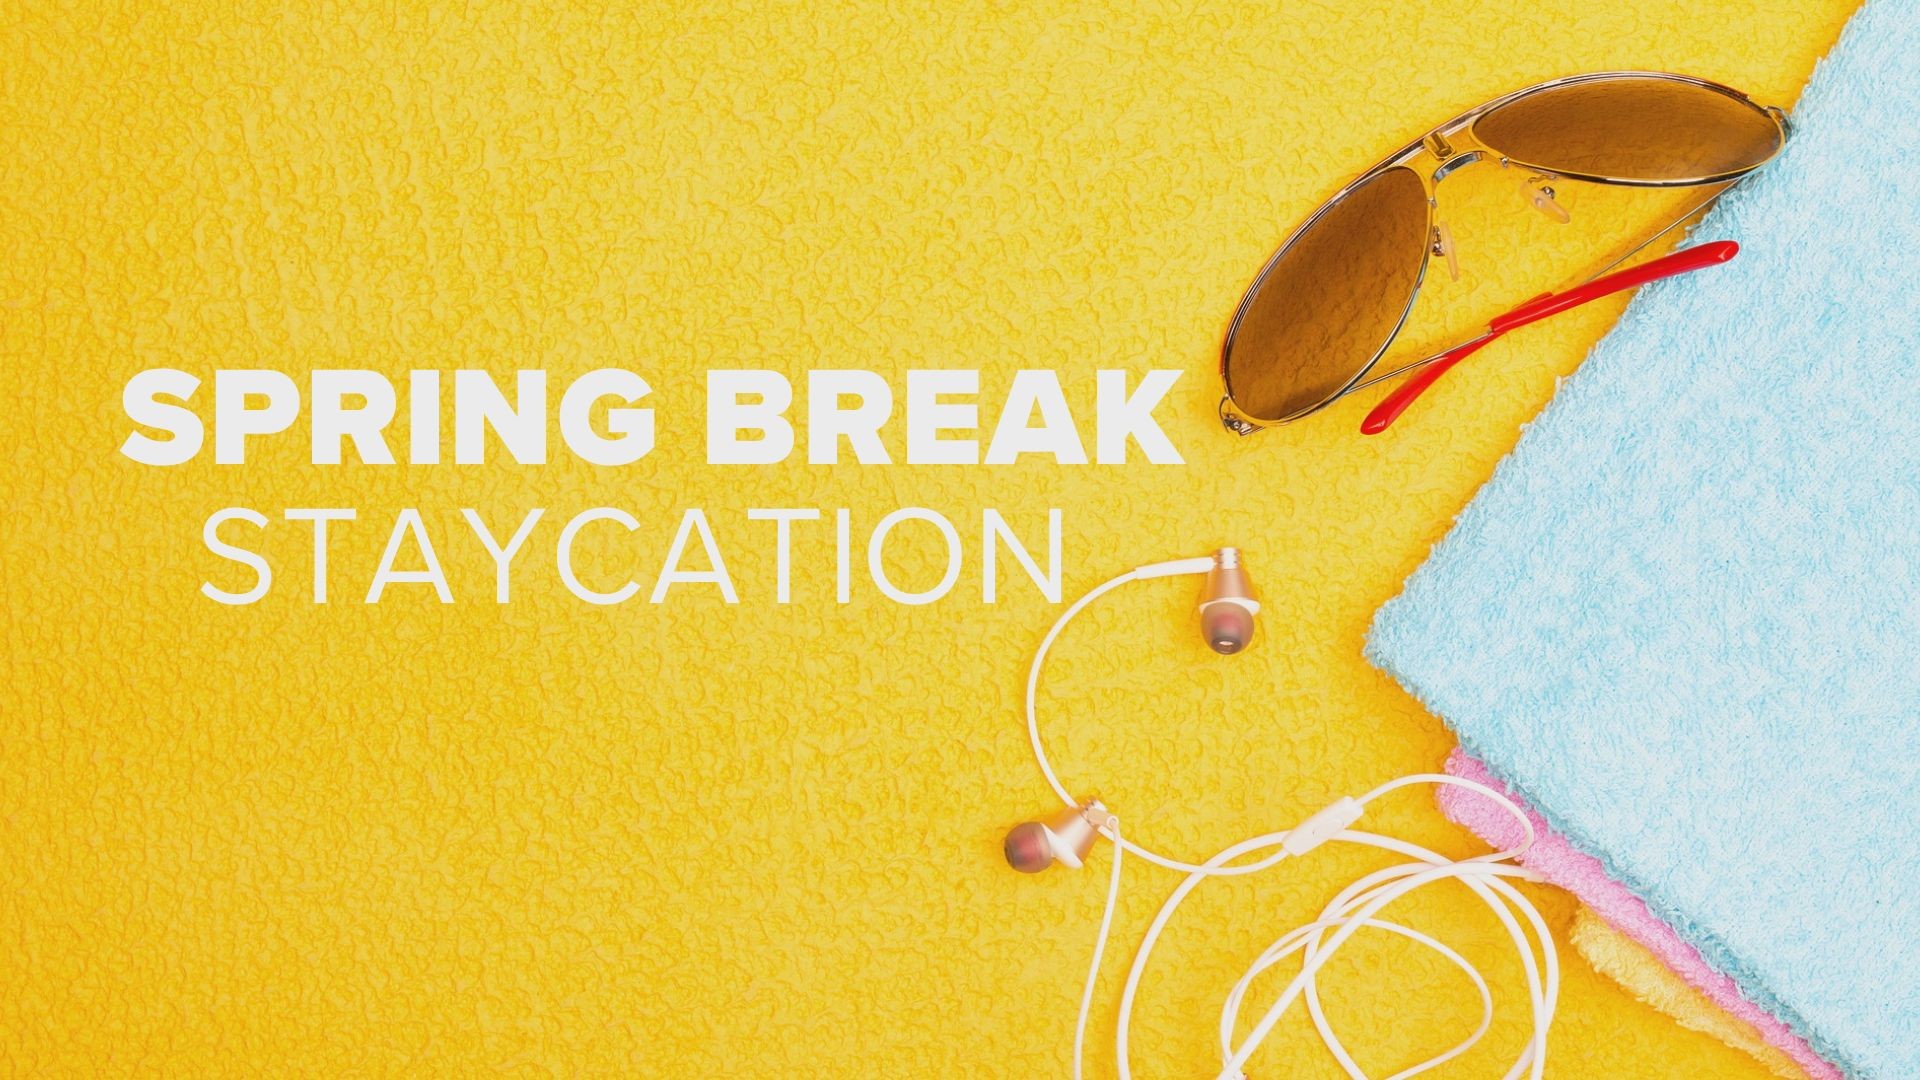 Here are some ways you can save money during Spring Break this year!